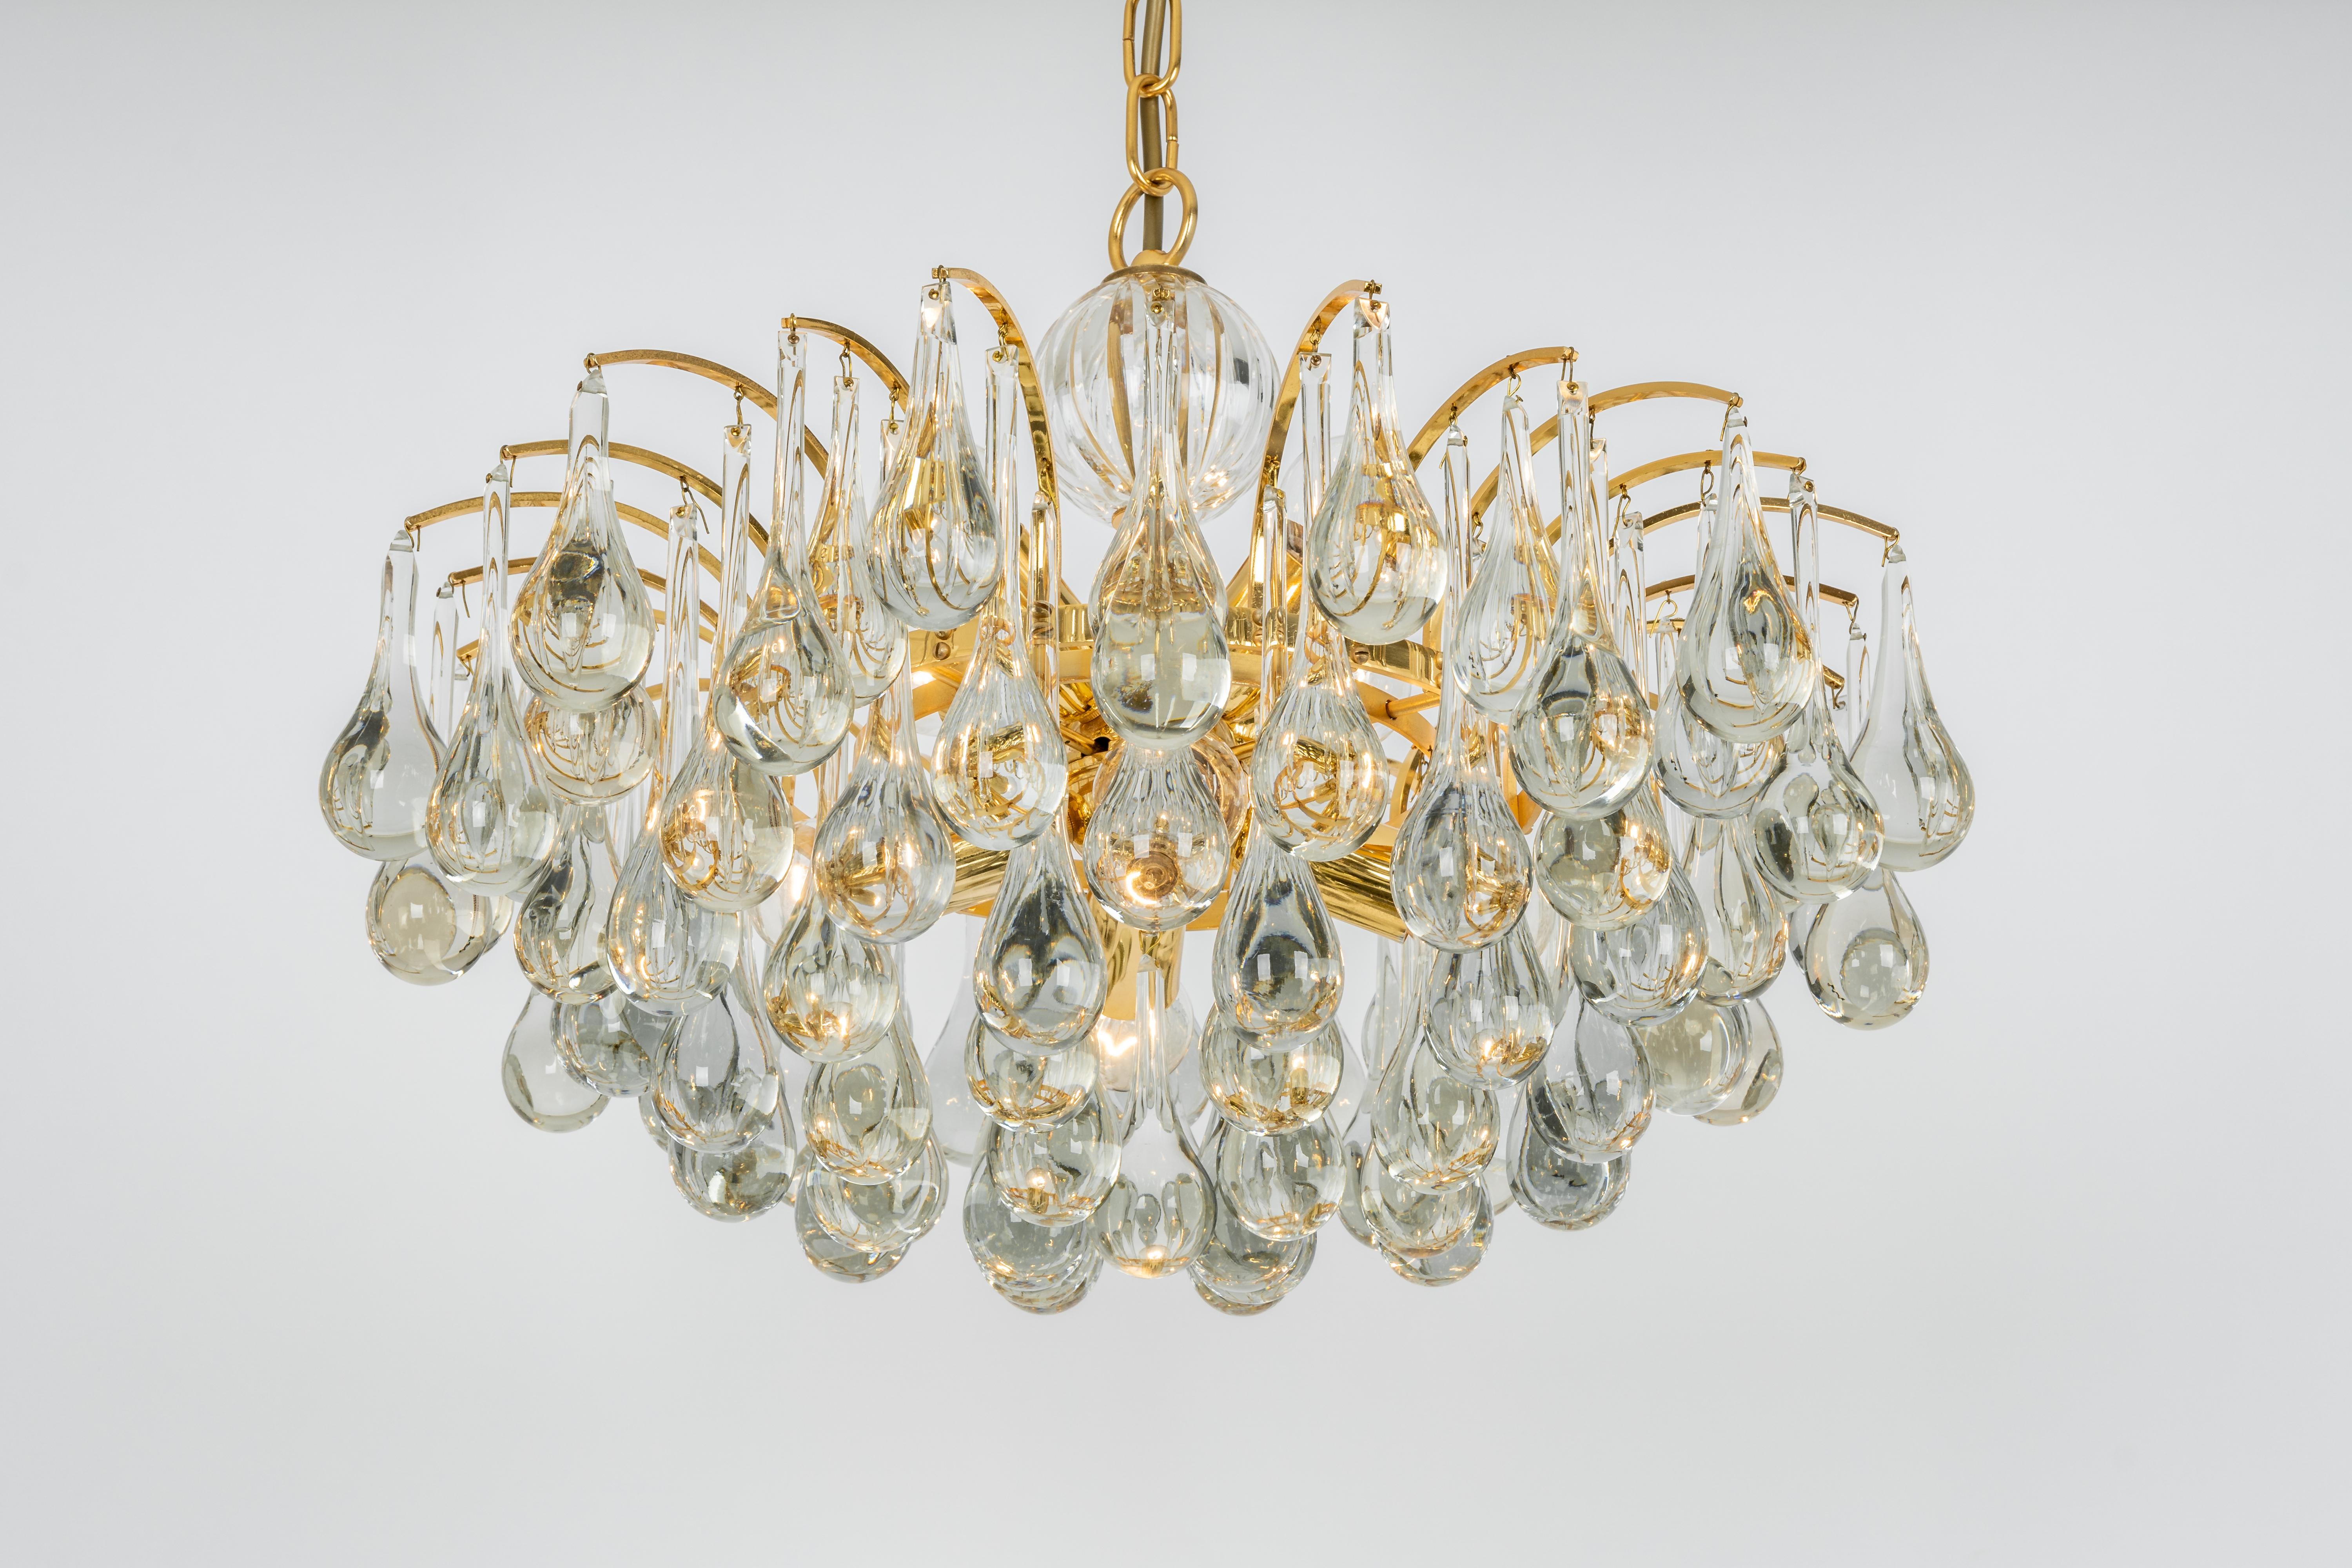 1 of 2 stunning chandelier by Christoph Palme, Germany, manufactured in 1970s. It’s composed of Murano teardrop glass pieces on a gilded brass frame.

High quality and in very good condition. Cleaned, well-wired and ready to use. 

The fixture